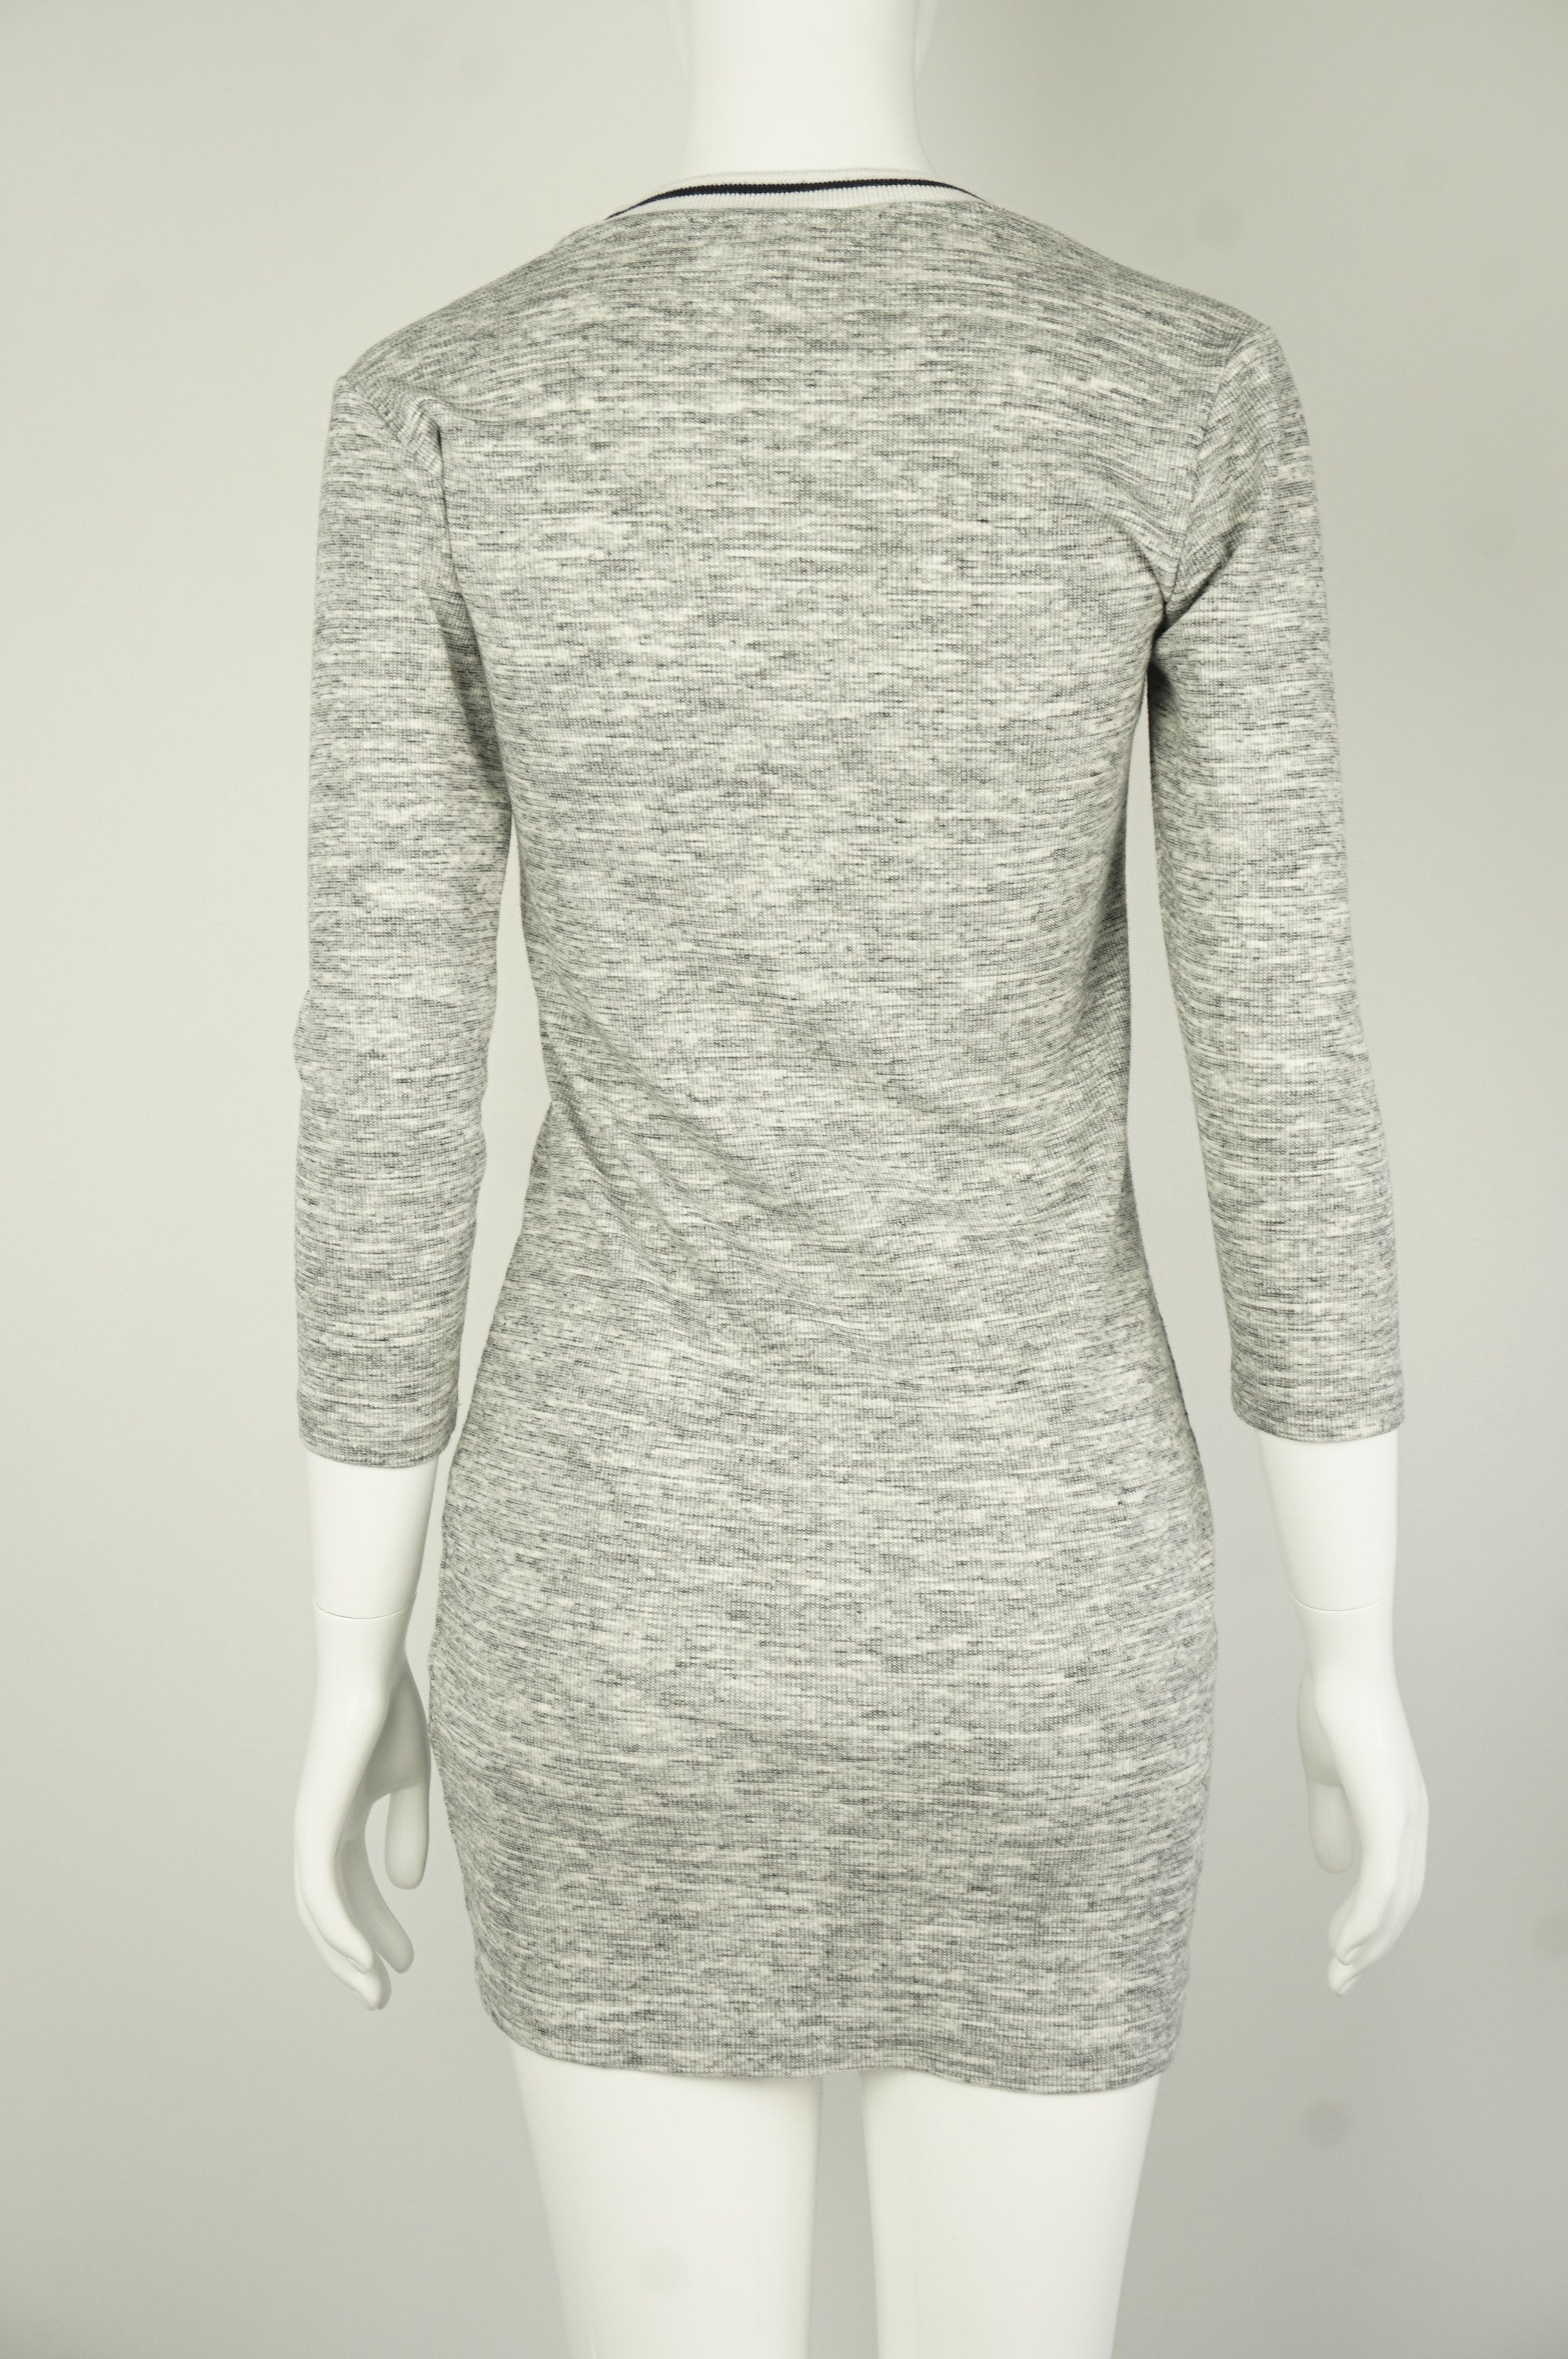 Forever 21 Simple Grey Straight-Cut Mini Dress with Striped Round Neck, Simple and comfy, this Grey Straight-Cut Mini Dress with Striped Round Neck is perfect for outings, casual hangouts, and business casual events.  , Grey, Cotton Fabric, women's Dresses & Skirts, women's Grey Dresses & Skirts, Forever 21 women's Dresses & Skirts, Simple Casual Women's Dress, Straight Cut Comfy Women's Dress, Women's Baseball Dress